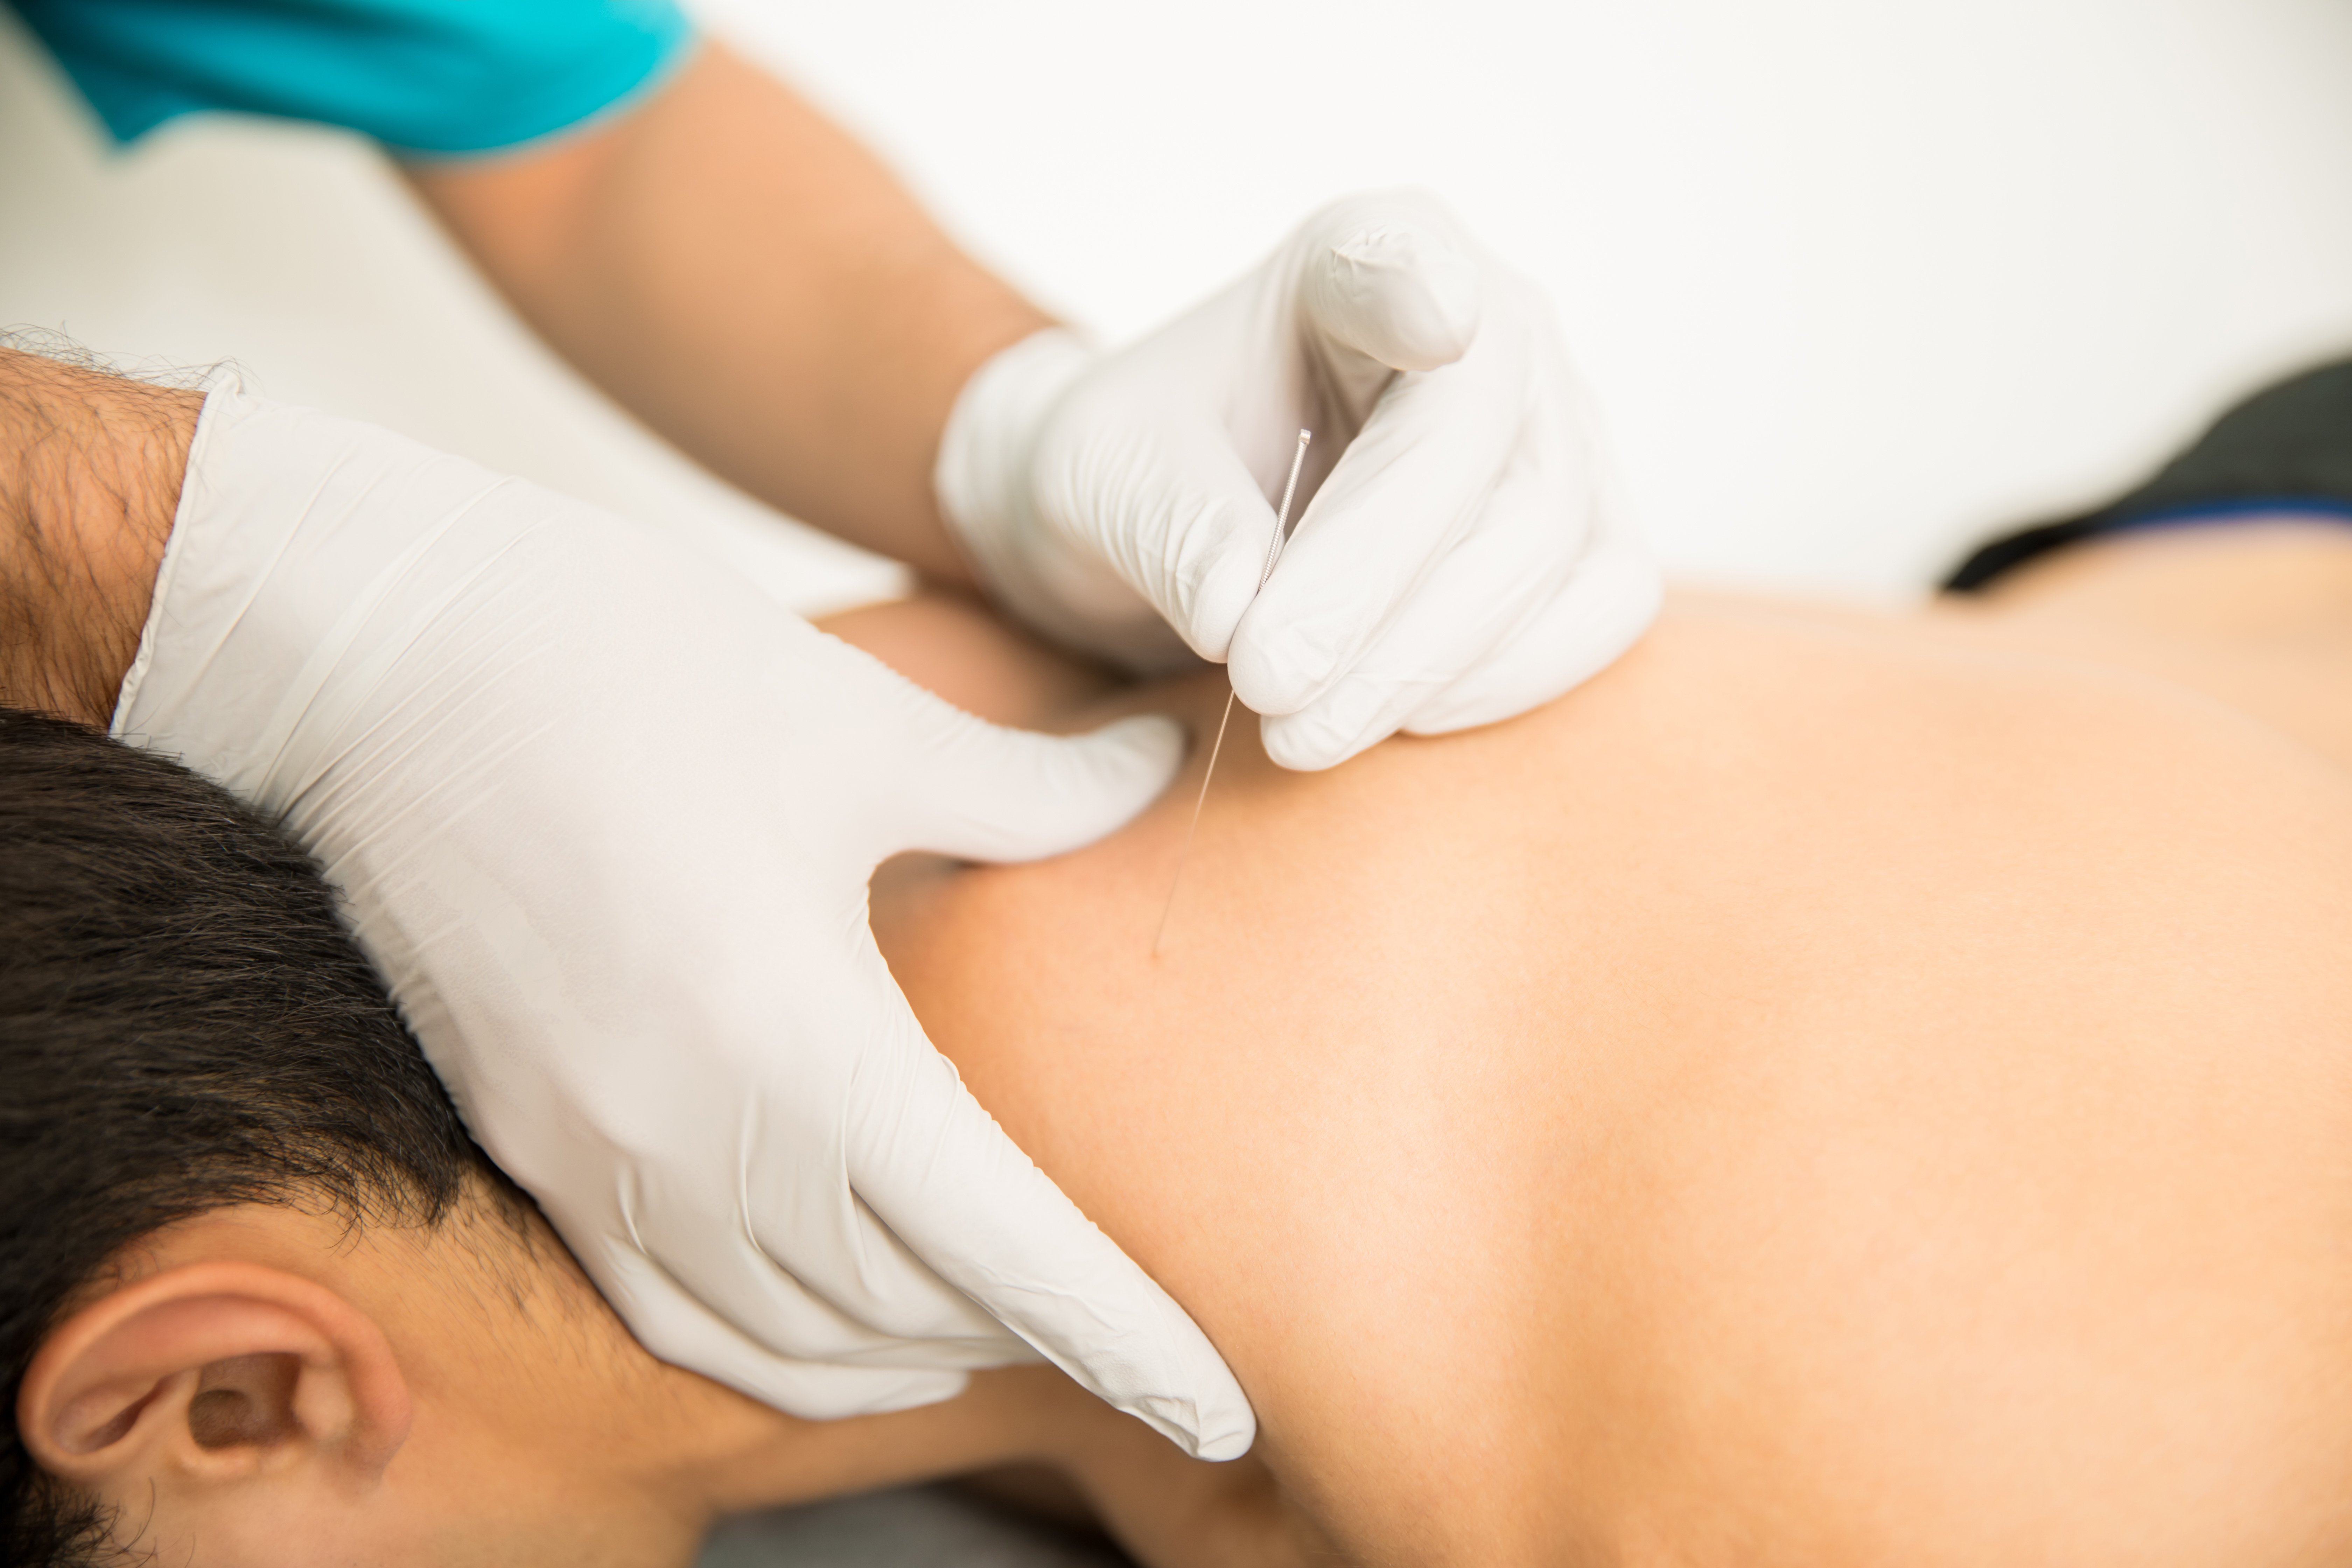 Dry Needling in Physiotherapy for Sport Injuries